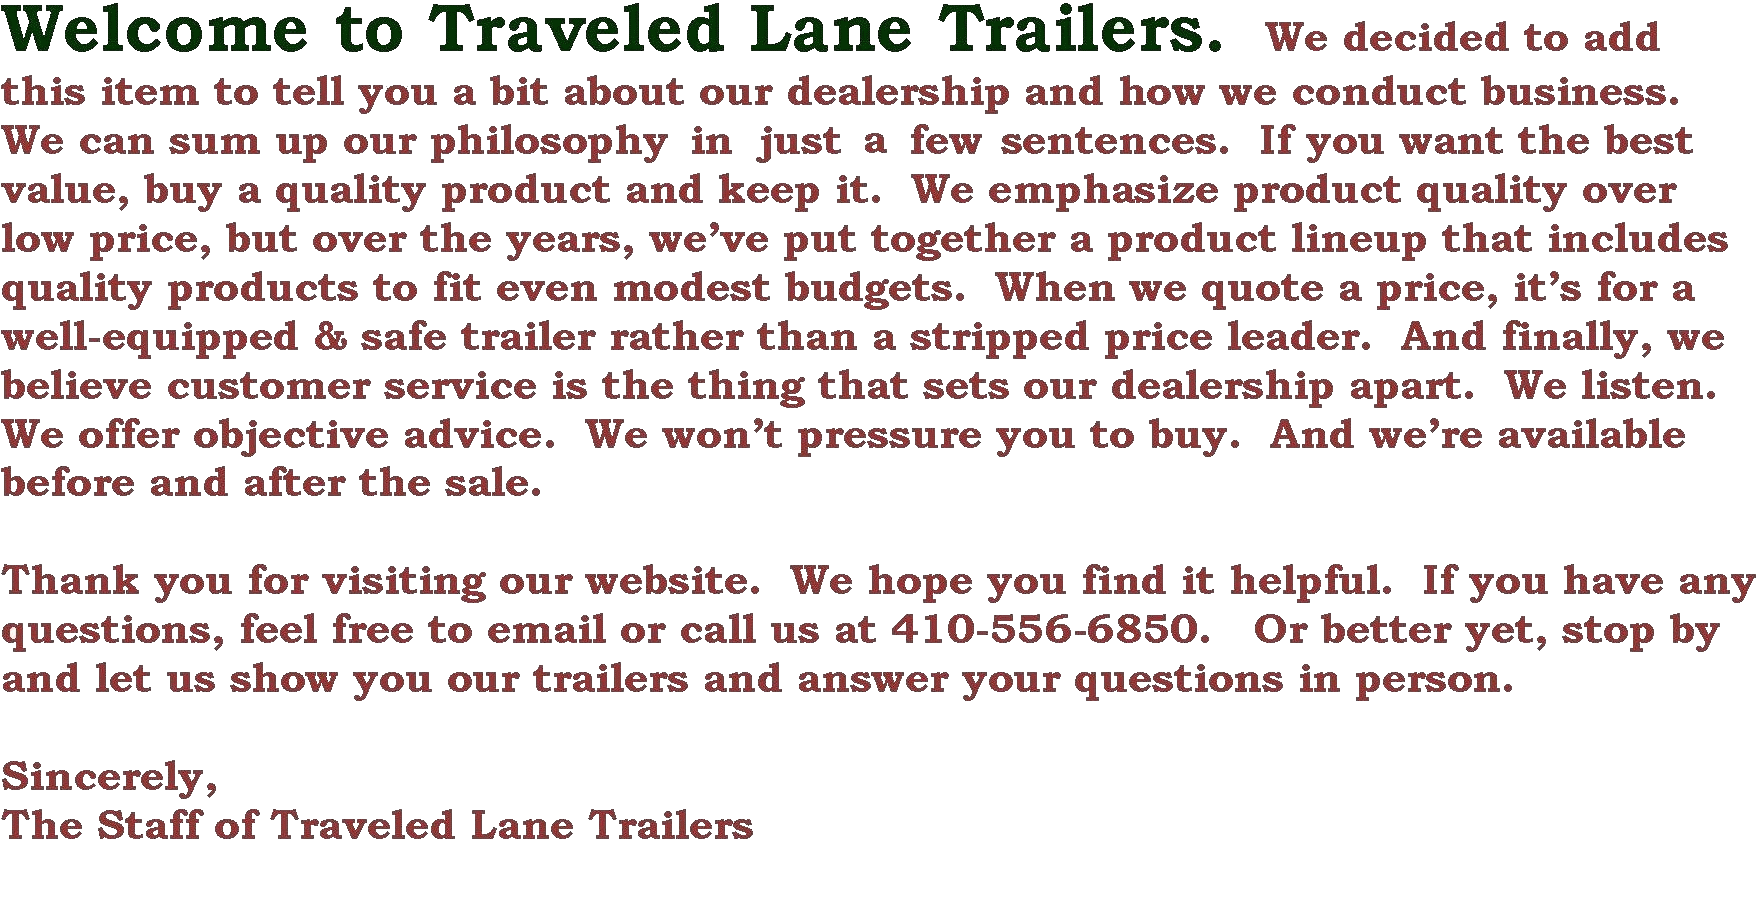 Welcome to Traveled Lane Trailers